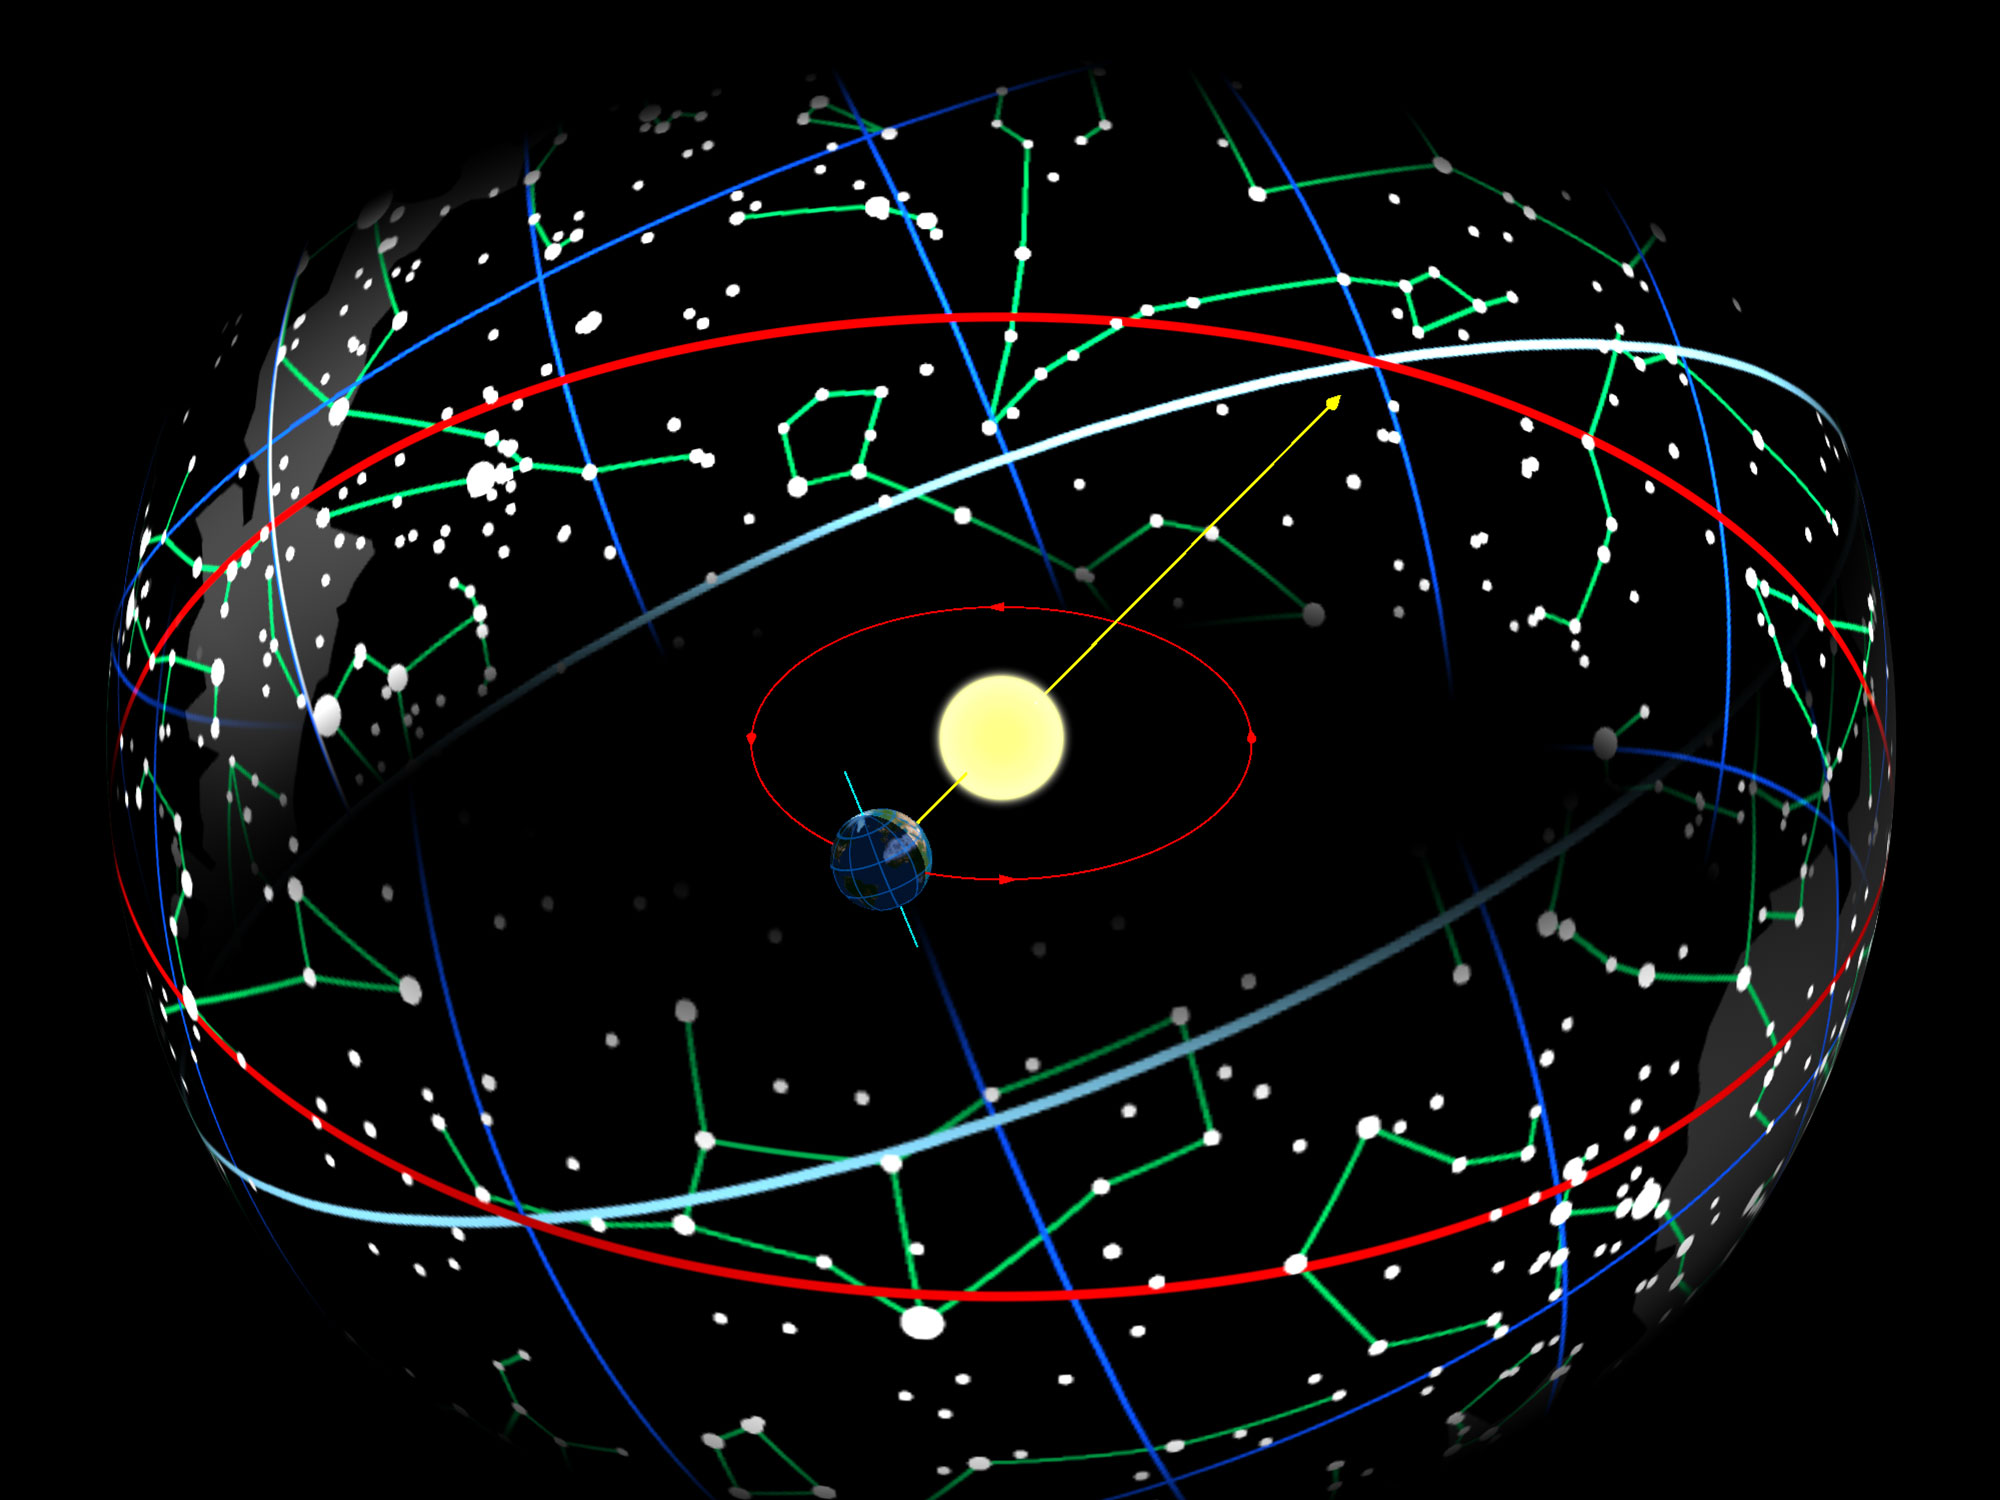 The Sun and the  Ecliptic, showing the Earth's orbit and position relative to the Sun.